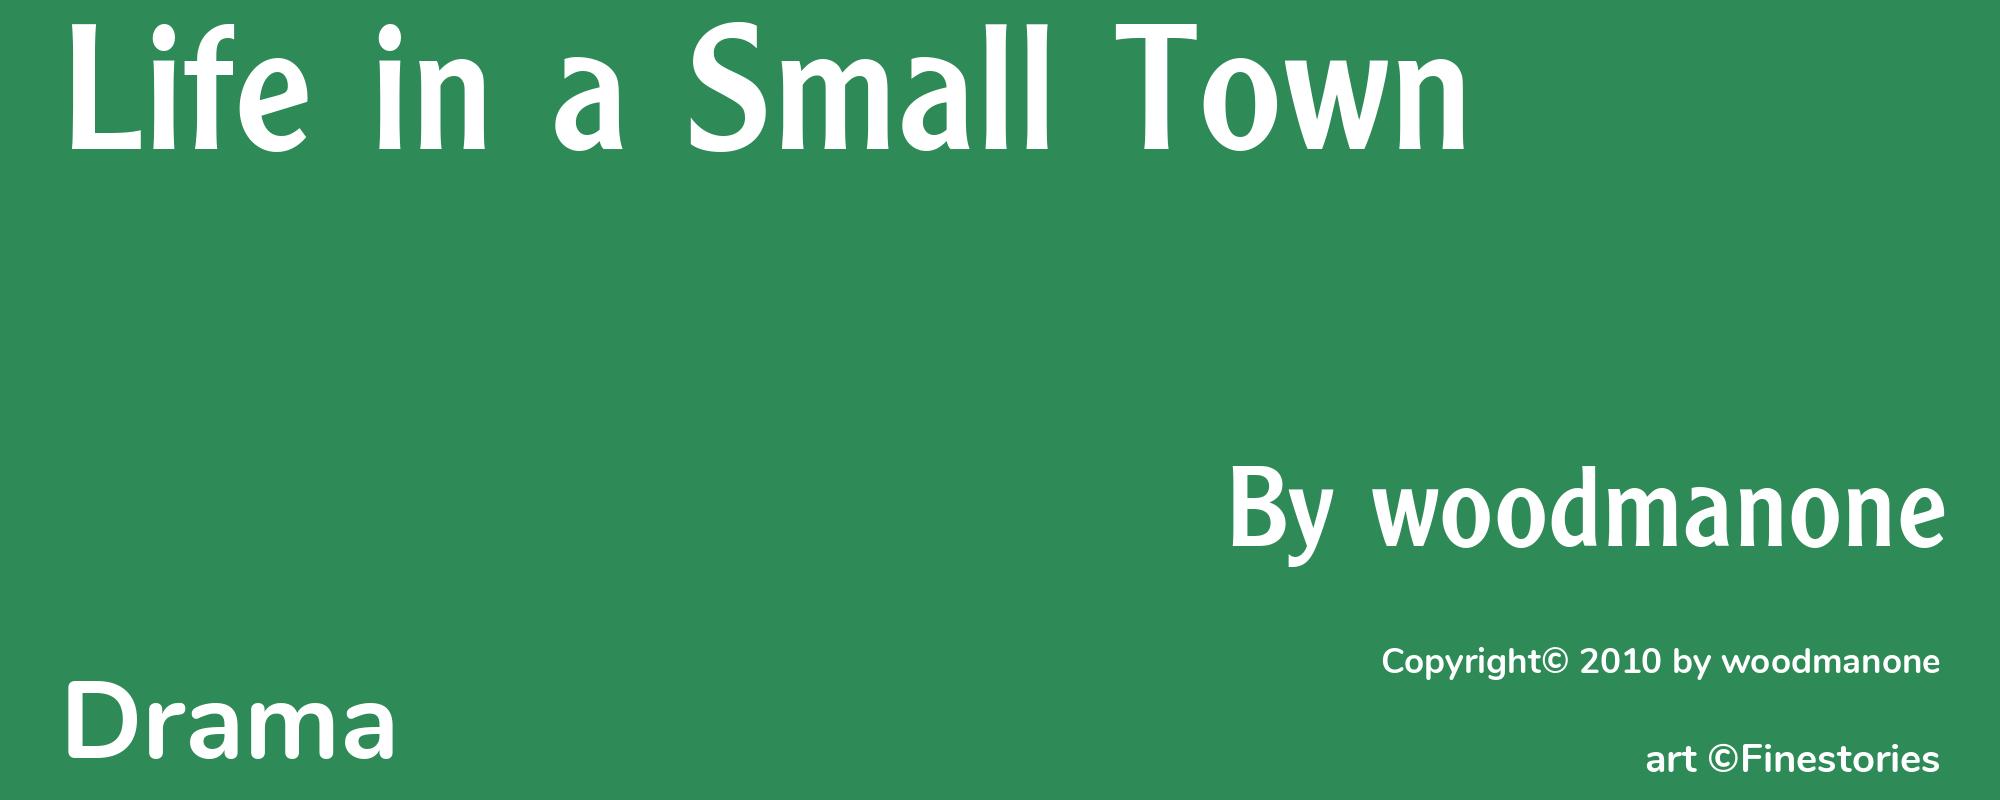 Life in a Small Town - Cover